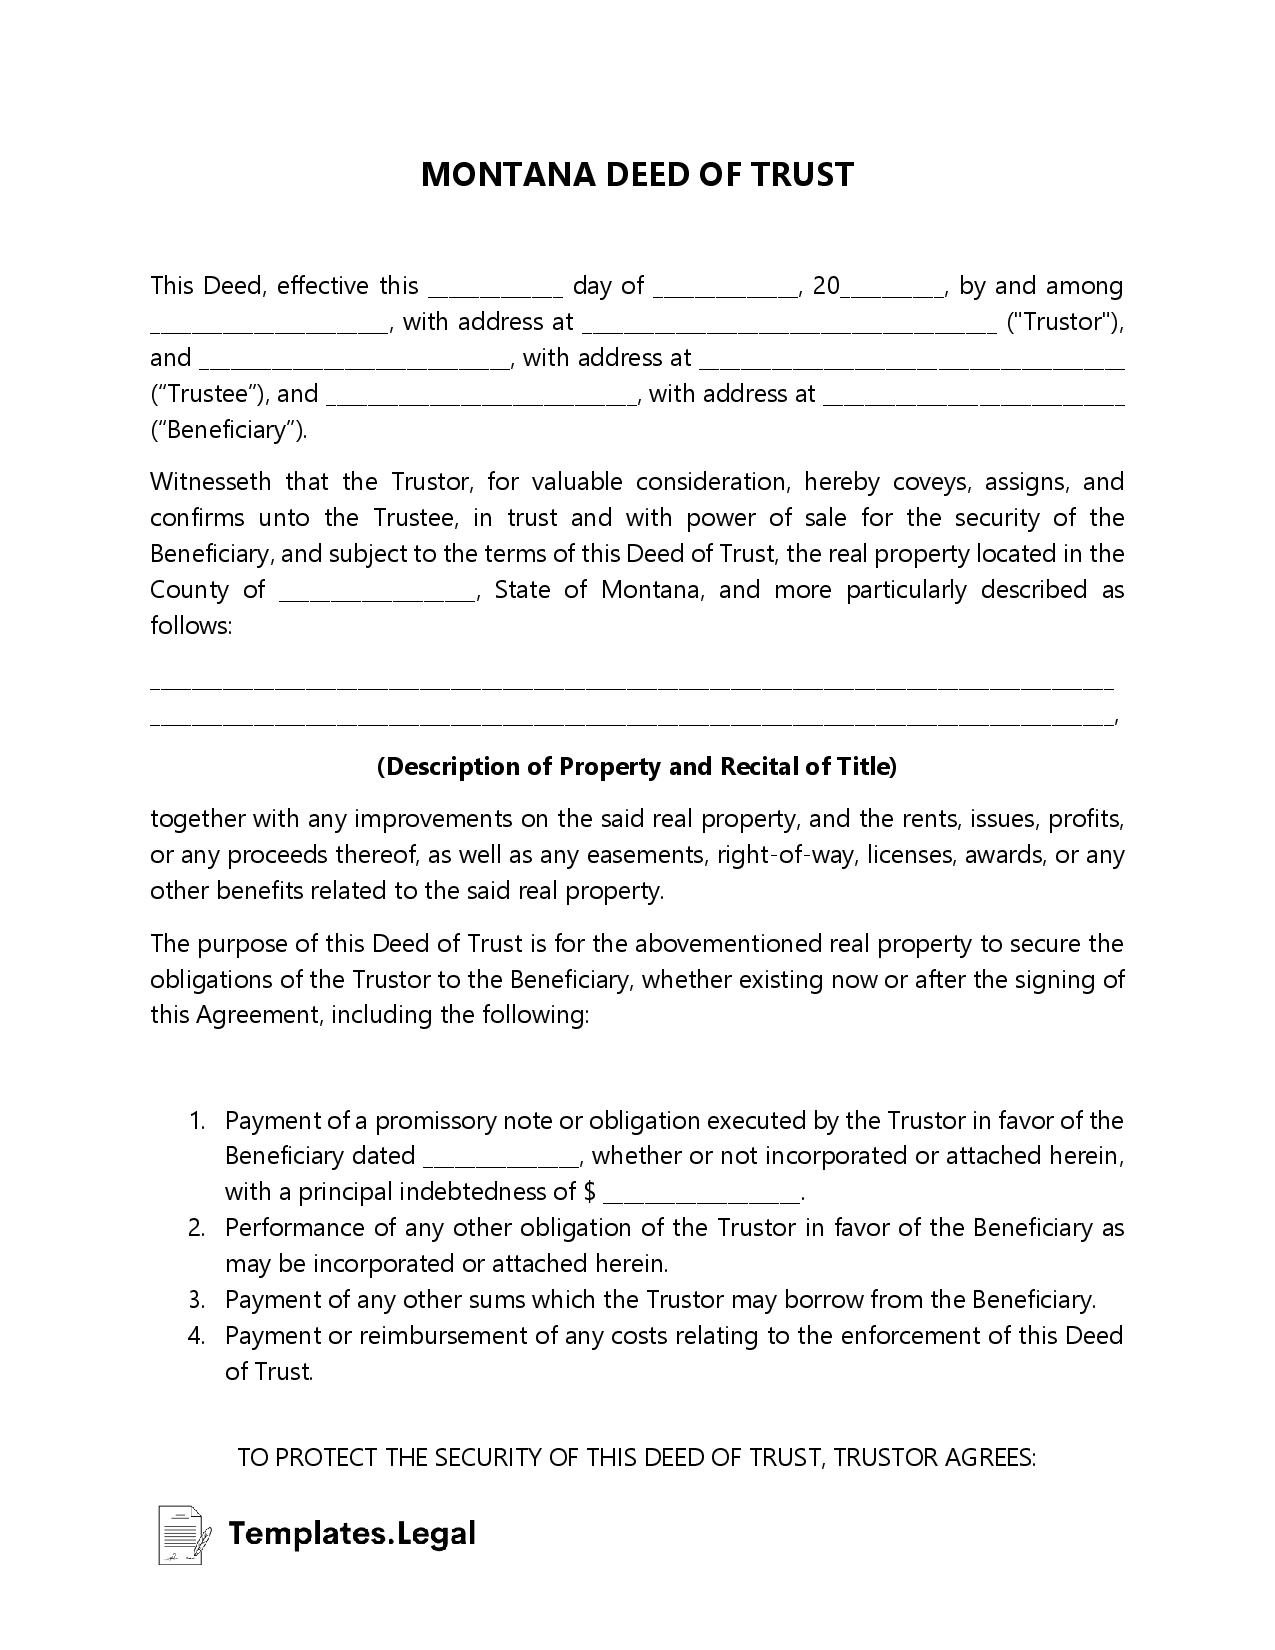 Montana Deed of Trust - Templates.Legal